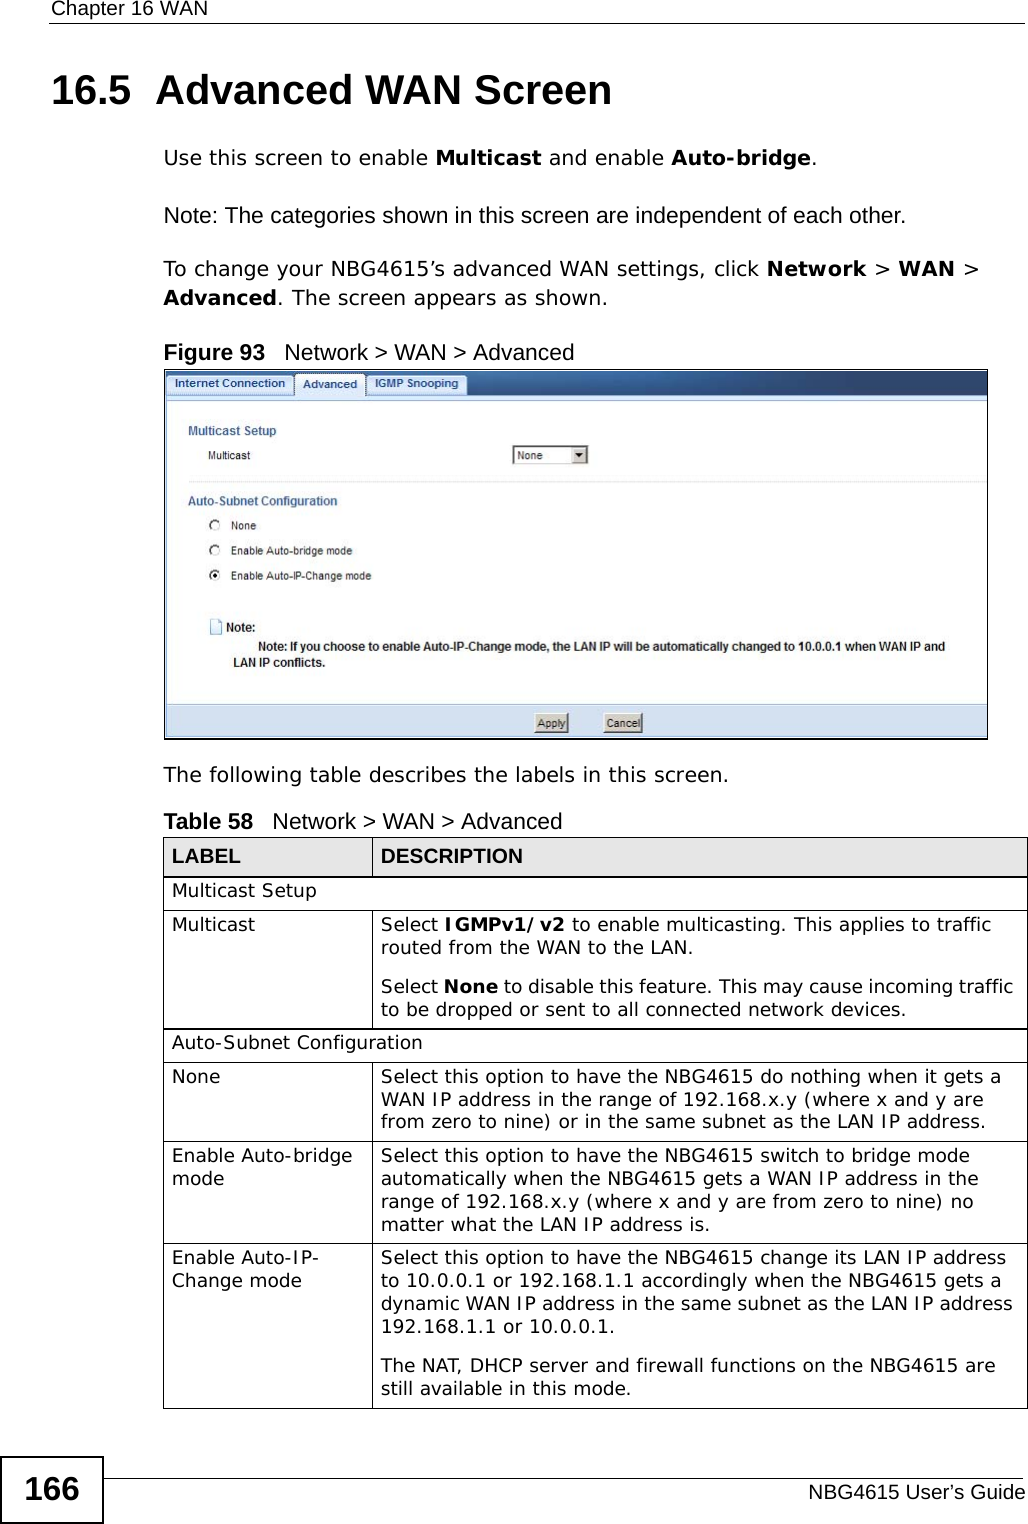 Chapter 16 WANNBG4615 User’s Guide16616.5  Advanced WAN ScreenUse this screen to enable Multicast and enable Auto-bridge.Note: The categories shown in this screen are independent of each other. To change your NBG4615’s advanced WAN settings, click Network &gt; WAN &gt; Advanced. The screen appears as shown.Figure 93   Network &gt; WAN &gt; Advanced The following table describes the labels in this screen.Table 58   Network &gt; WAN &gt; AdvancedLABEL DESCRIPTIONMulticast SetupMulticast Select IGMPv1/v2 to enable multicasting. This applies to traffic routed from the WAN to the LAN. Select None to disable this feature. This may cause incoming traffic to be dropped or sent to all connected network devices.Auto-Subnet ConfigurationNone Select this option to have the NBG4615 do nothing when it gets a WAN IP address in the range of 192.168.x.y (where x and y are from zero to nine) or in the same subnet as the LAN IP address.Enable Auto-bridge mode Select this option to have the NBG4615 switch to bridge mode automatically when the NBG4615 gets a WAN IP address in the range of 192.168.x.y (where x and y are from zero to nine) no matter what the LAN IP address is. Enable Auto-IP-Change mode Select this option to have the NBG4615 change its LAN IP address to 10.0.0.1 or 192.168.1.1 accordingly when the NBG4615 gets a dynamic WAN IP address in the same subnet as the LAN IP address 192.168.1.1 or 10.0.0.1.The NAT, DHCP server and firewall functions on the NBG4615 are still available in this mode.